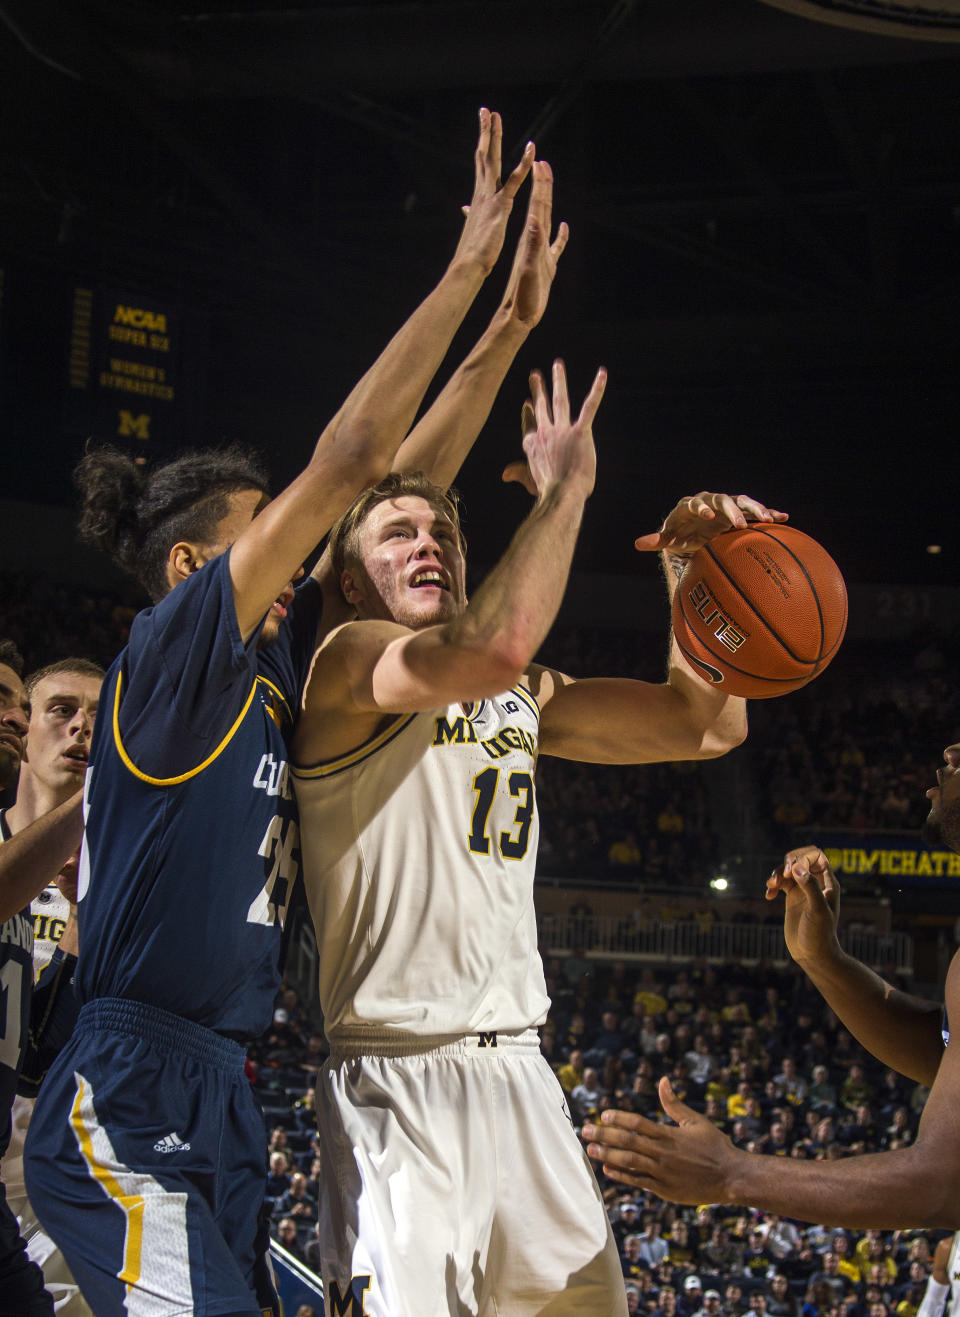 Chattanooga center Justin Brown, left, defends against Michigan forward Ignas Brazdeikis (13) under the basket in the second half of an NCAA college basketball game at Crisler Center in Ann Arbor, Mich., Friday, Nov. 23, 2018. (AP Photo/Tony Ding)